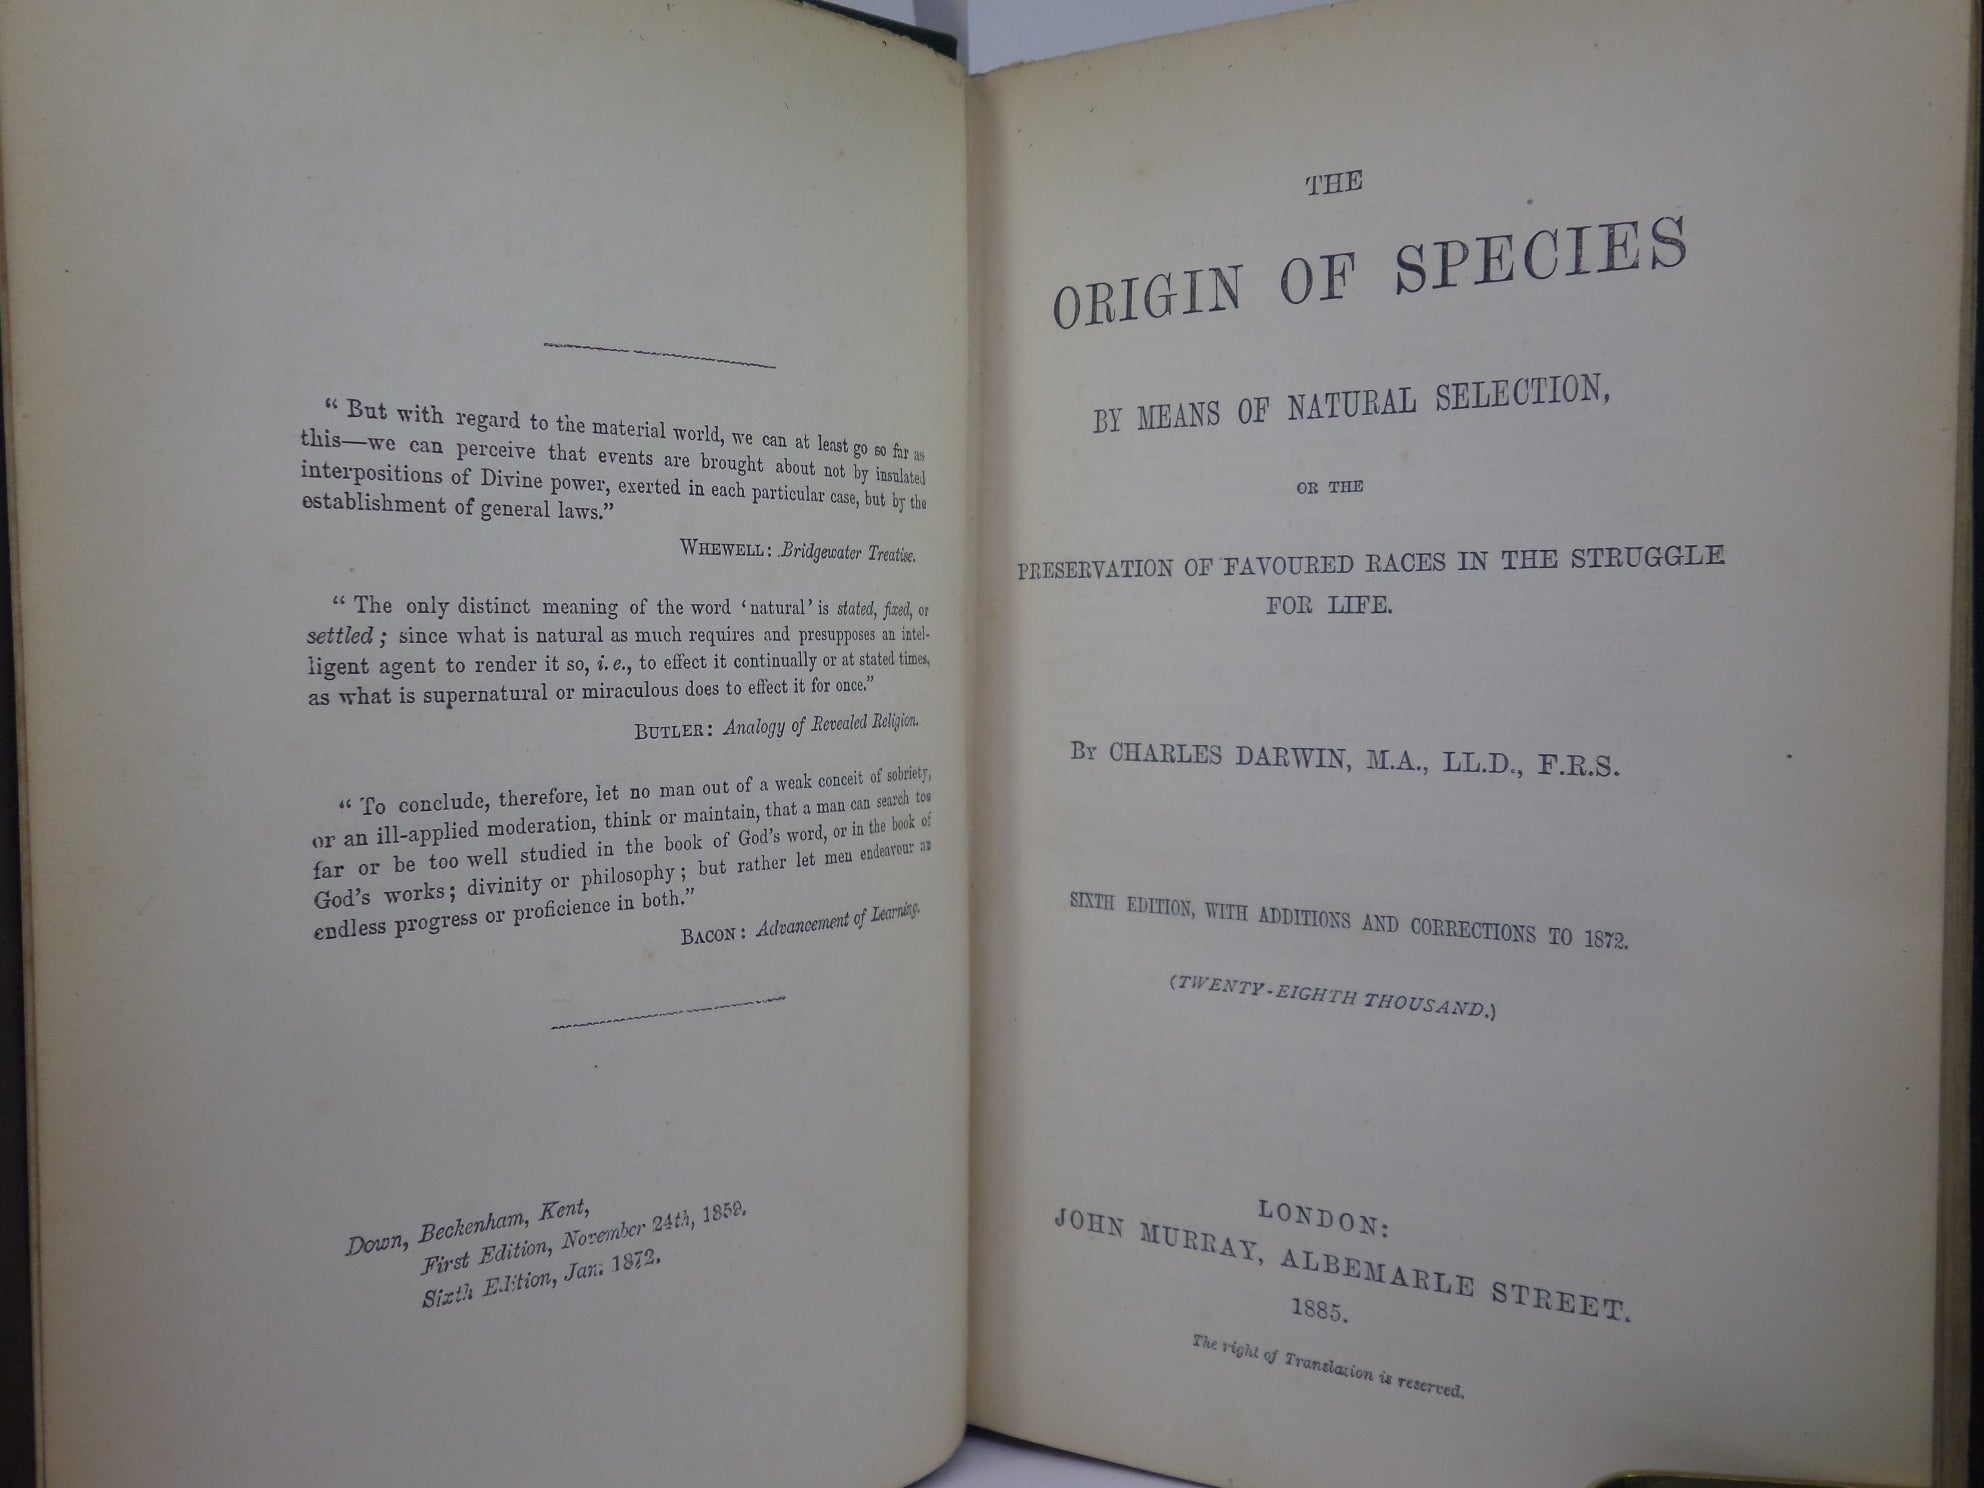 THE ORIGIN OF SPECIES BY MEANS OF NATURAL SELECTION BY CHARLES DARWIN 1885